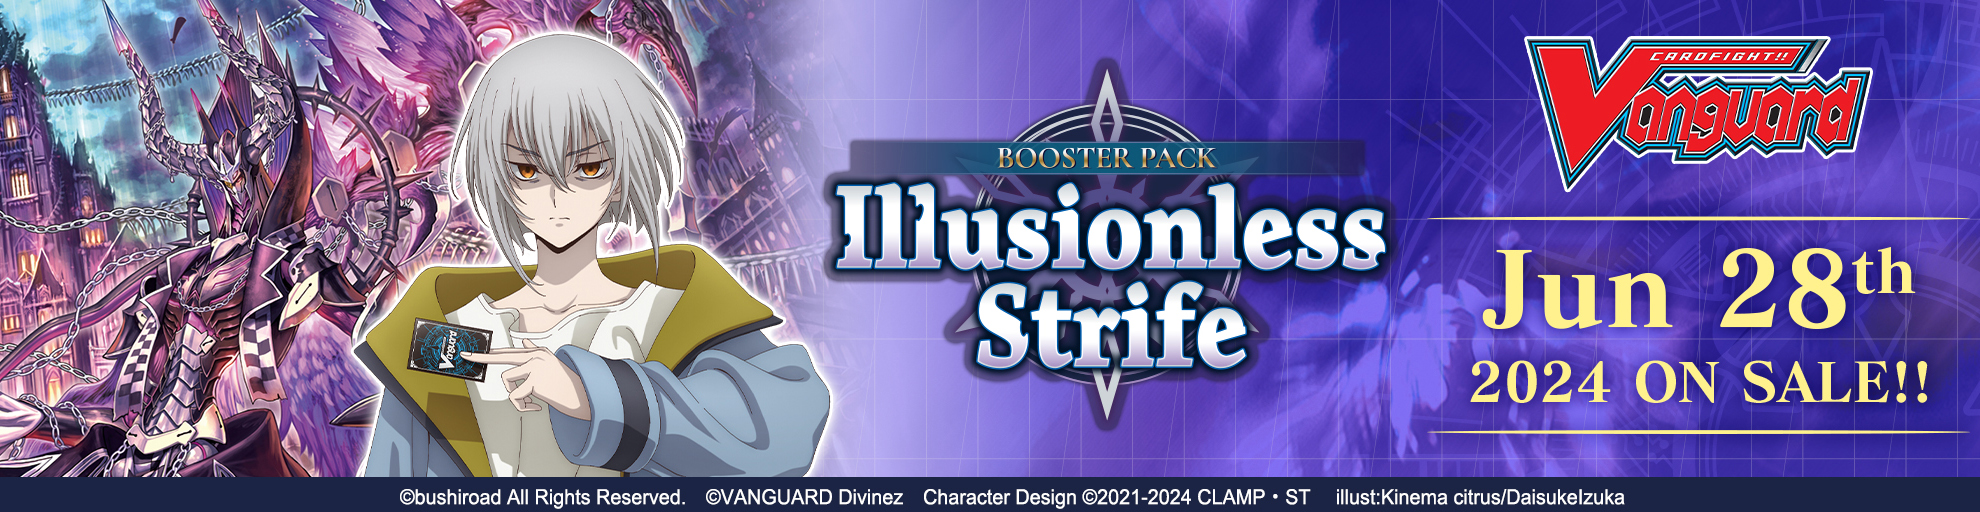 Cardfight!! Vanguard Booster Pack 02: Illusionless Strife